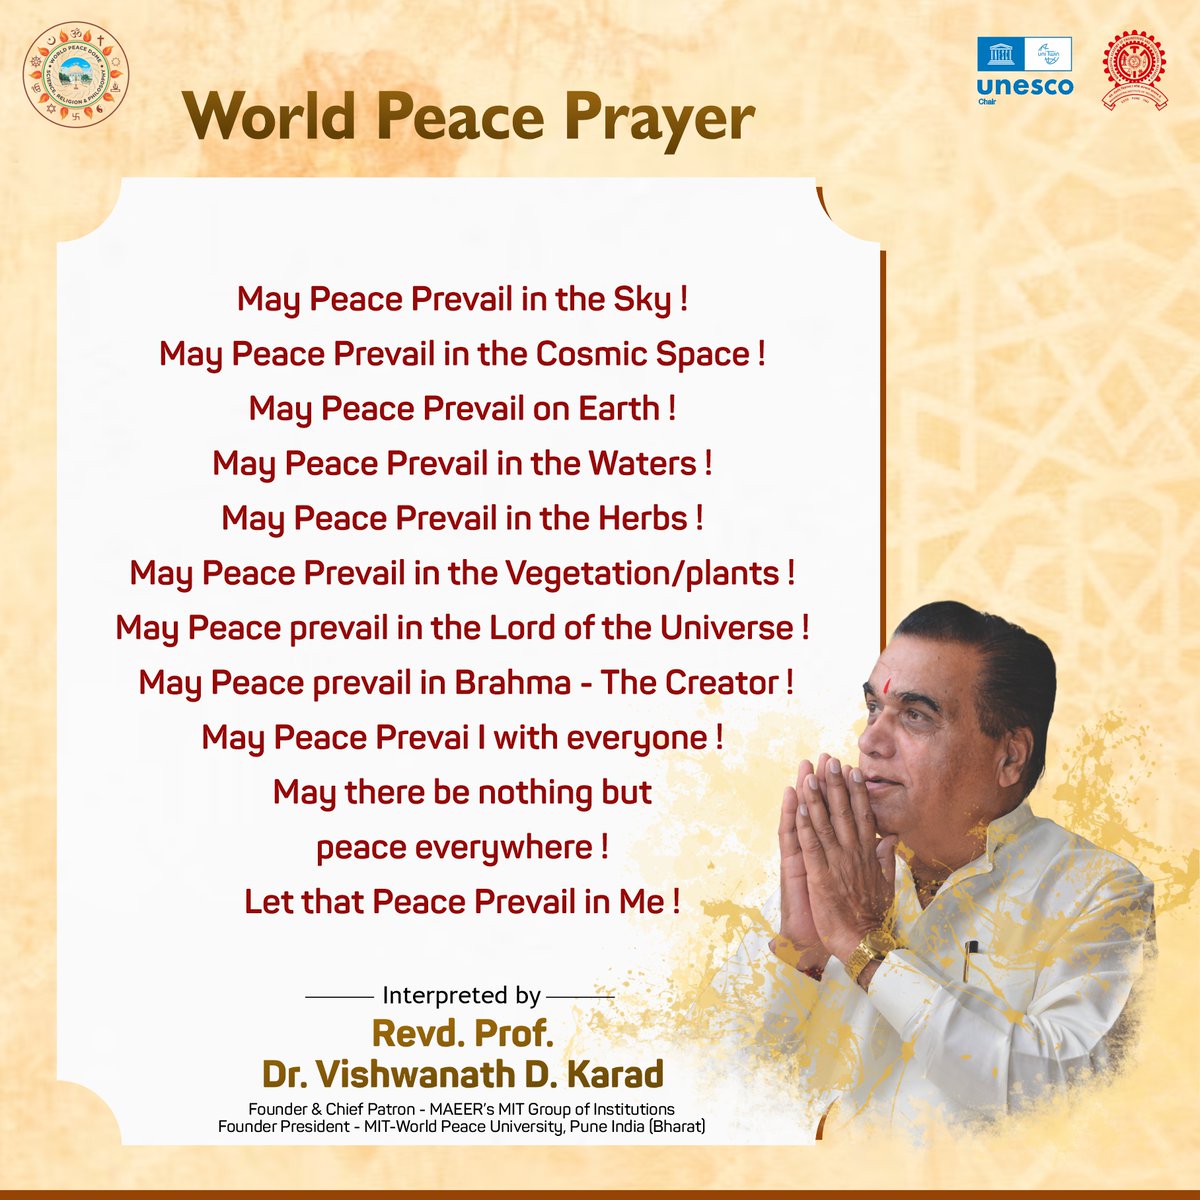 Discover the serene energy and peaceful vibrations of the Vishwashanti Prayer beautifully interpreted by the esteemed Rev'd Prof. Dr. Vishwanath Karad and let it guide your soul towards Peace and Harmony.

#MITWPU #MITWPUOfficial #WorldPeaceUniversity #DrVishwanathKarad #WPU